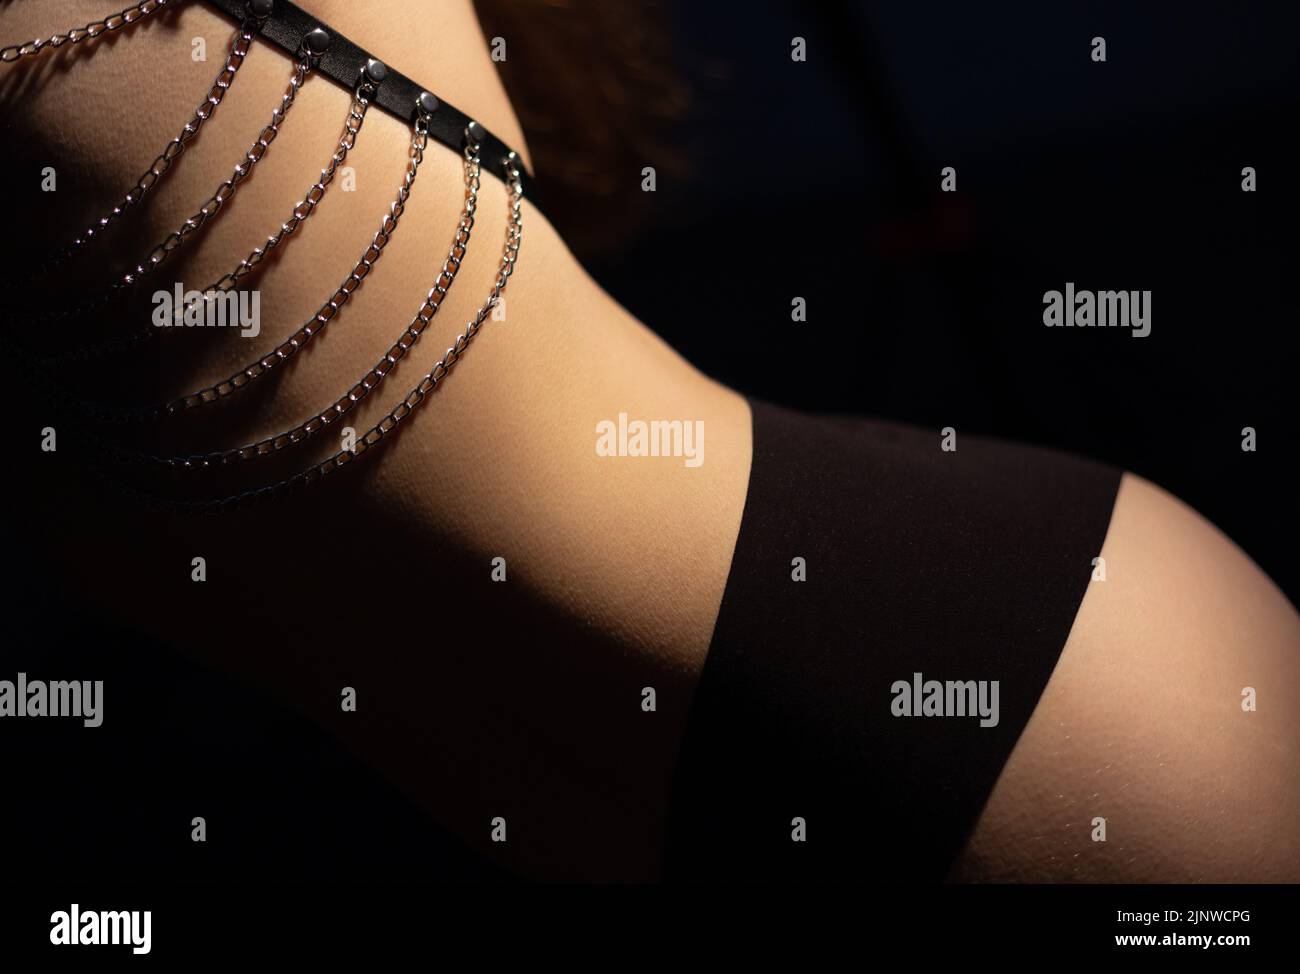 Image of woman in belt with hips wearing black lingerie in shadow Stock Photo